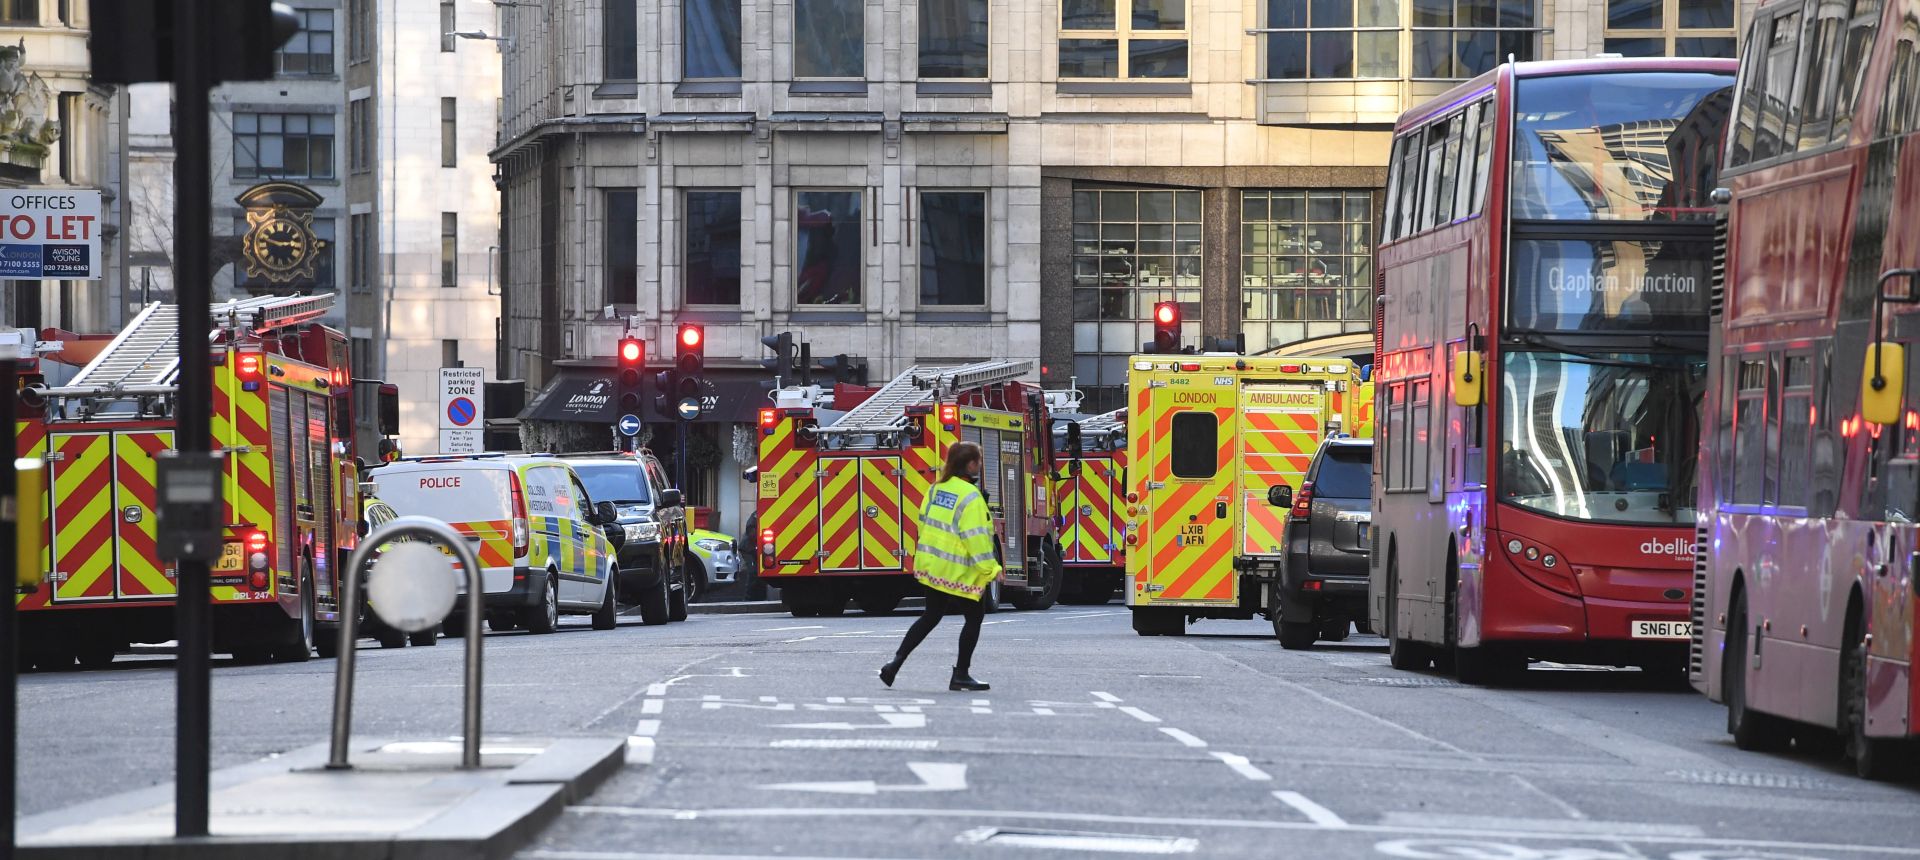 epa08033217 Police at the scene of an incident at London Bridge in London, Britain, 29 November 2019. According to reports, a man has been detained after police officers were called to a stabbing at London Bridge. Several people have been injured.  EPA/FACUNDO ARRIZABALAGA